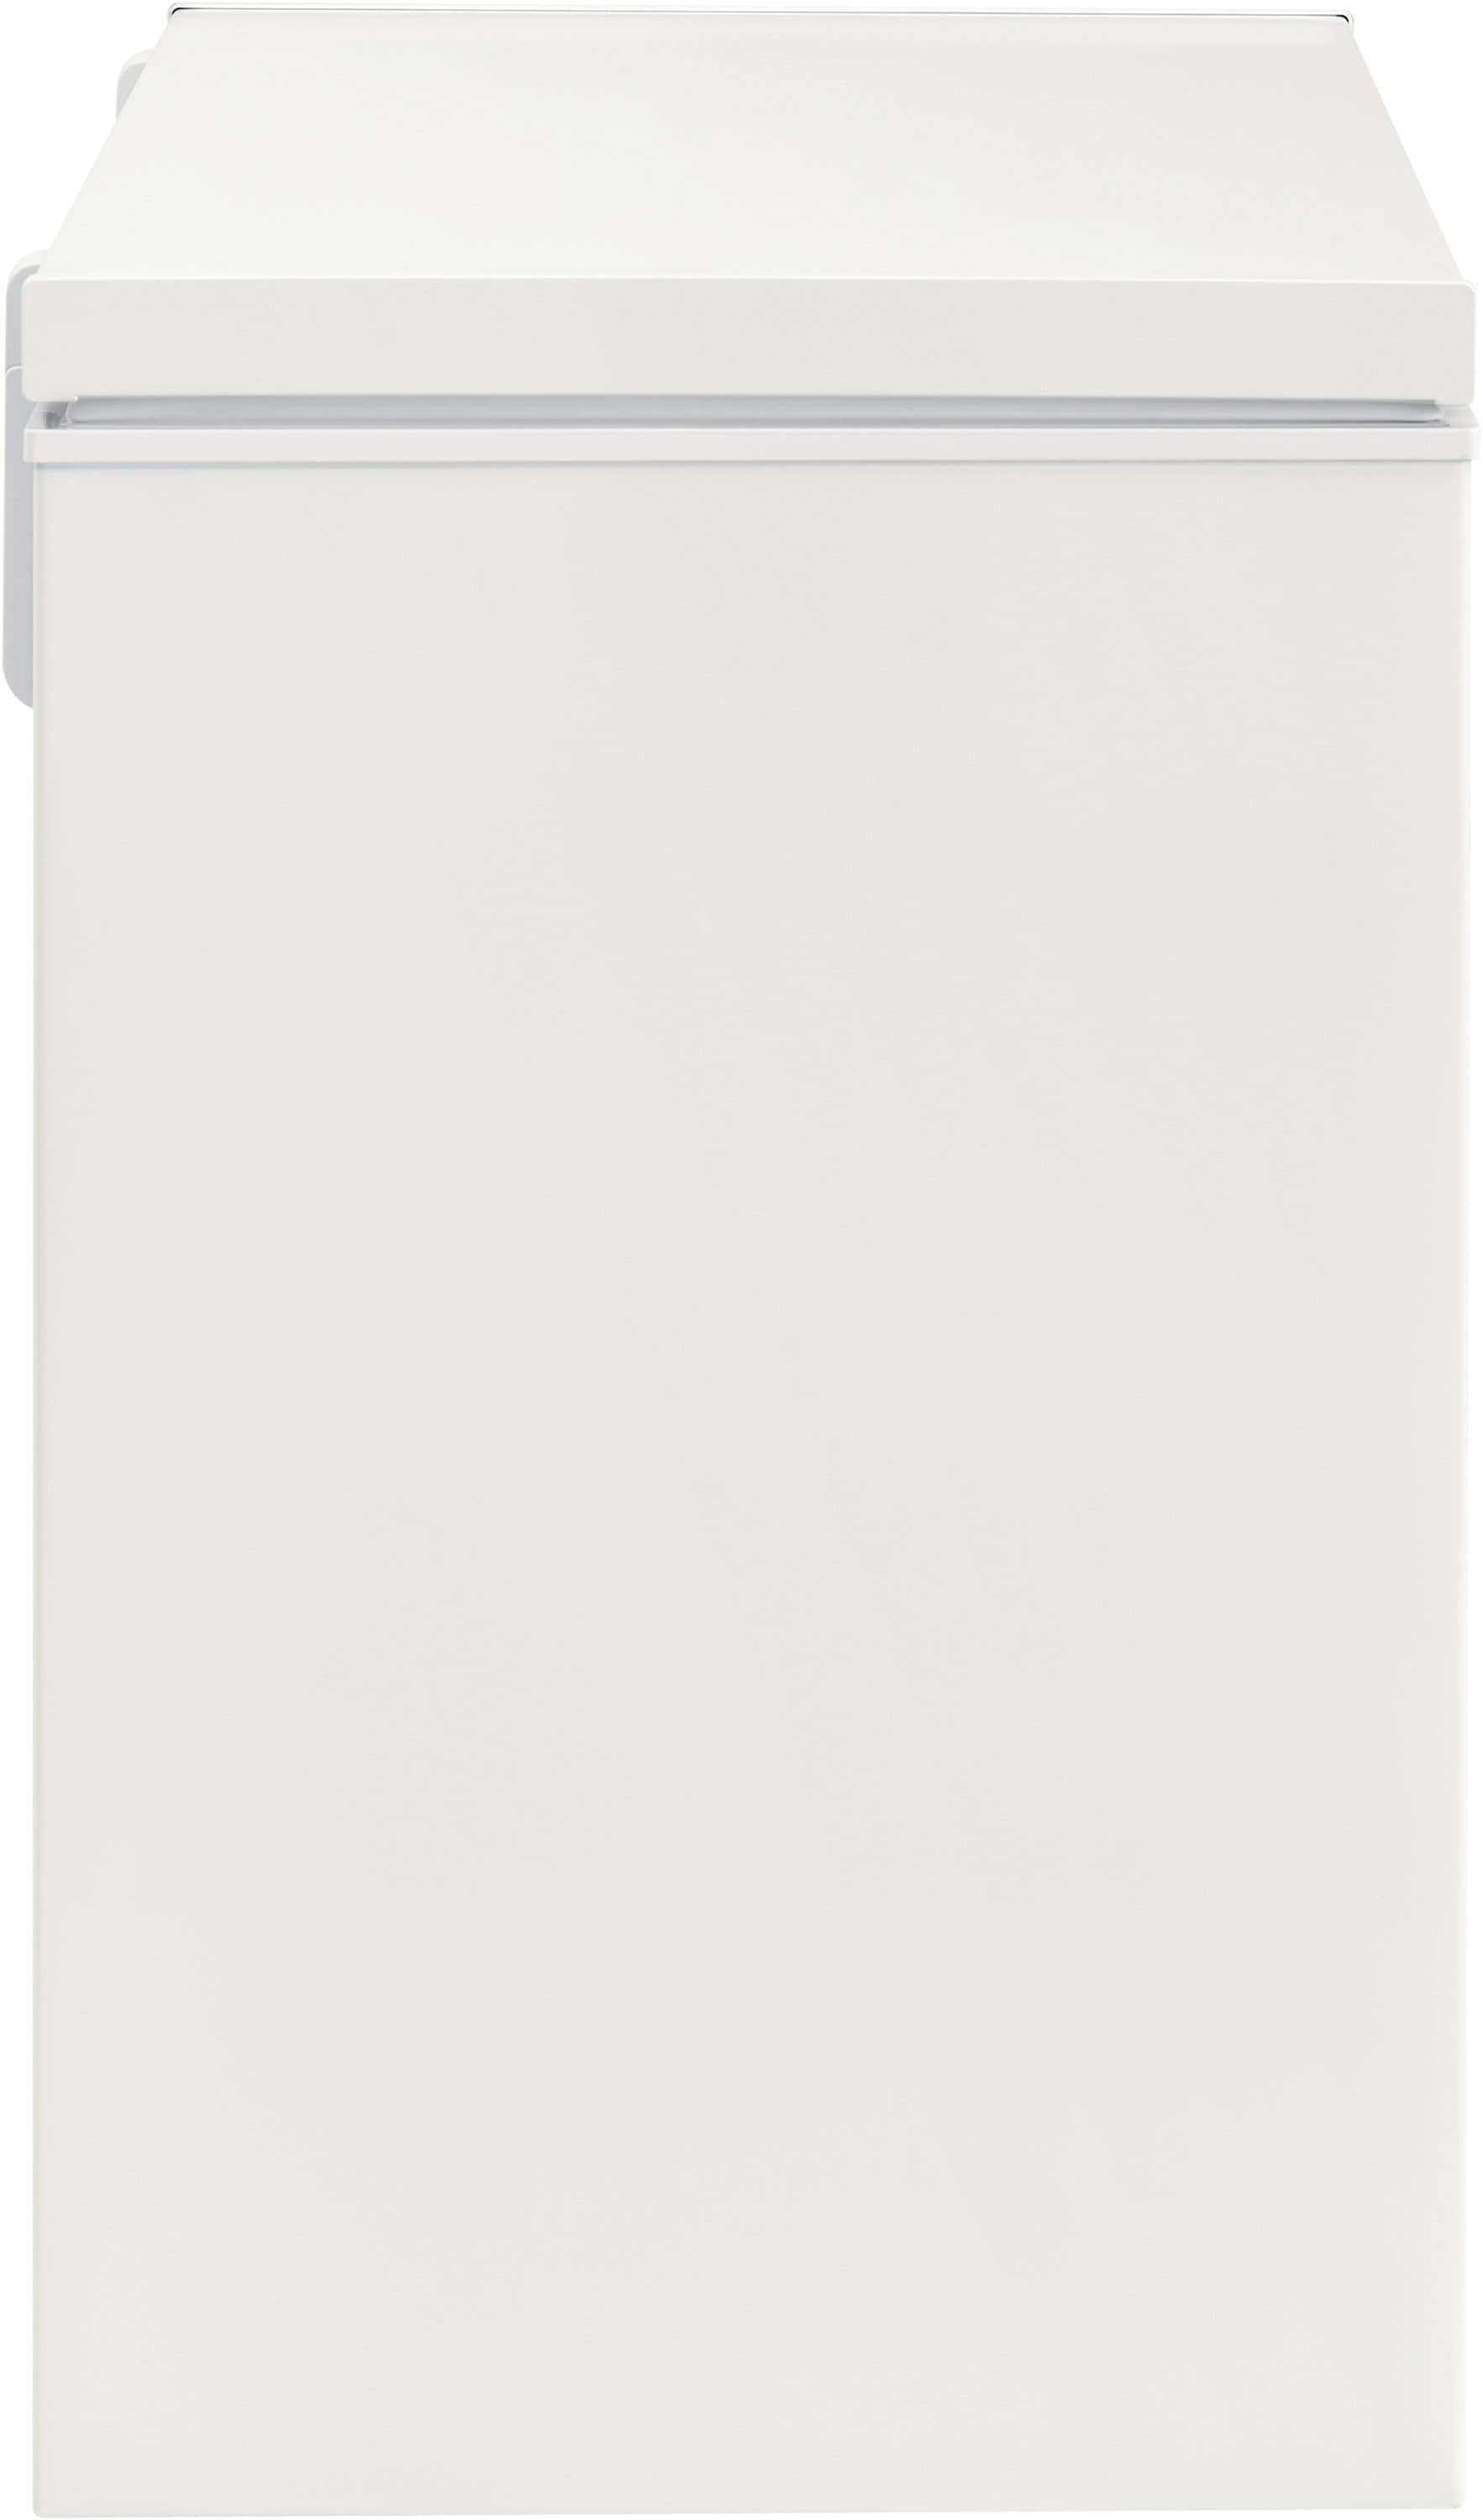 Chest Freezer Moosoo 7.0 Cu ft Deep Freezer Chest Freezer with Energy Saving and Low-Noise, Md07, White, Size: 18.4 inch x 15.4 inch x 5.1 inch